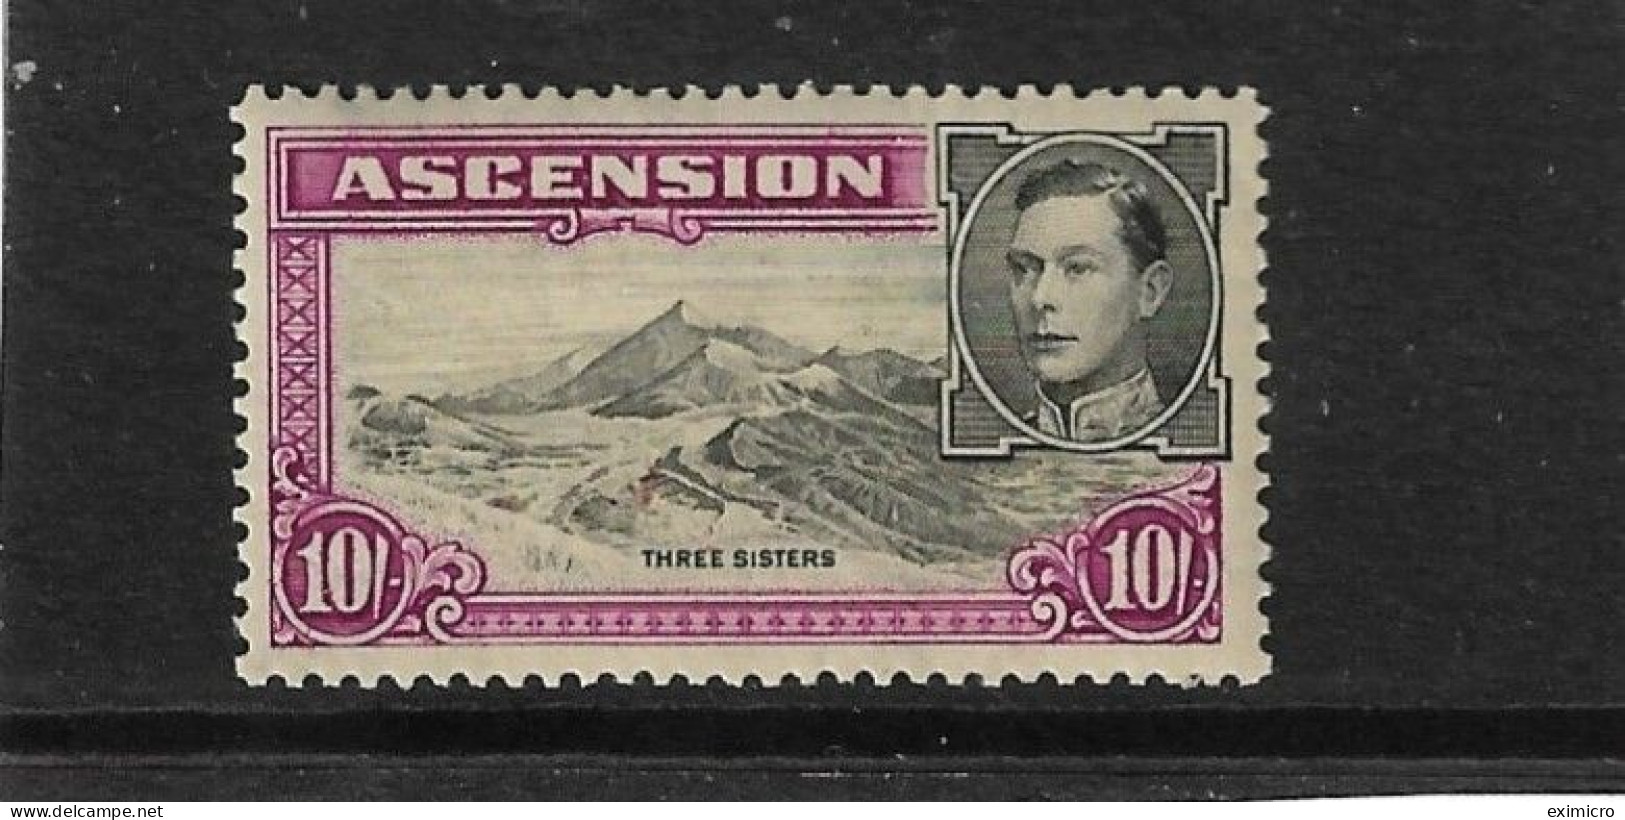 ASCENSION 1938 10s SG 47 PERF 13½ UNMOUNTED MINT Cat £120 - Ascension